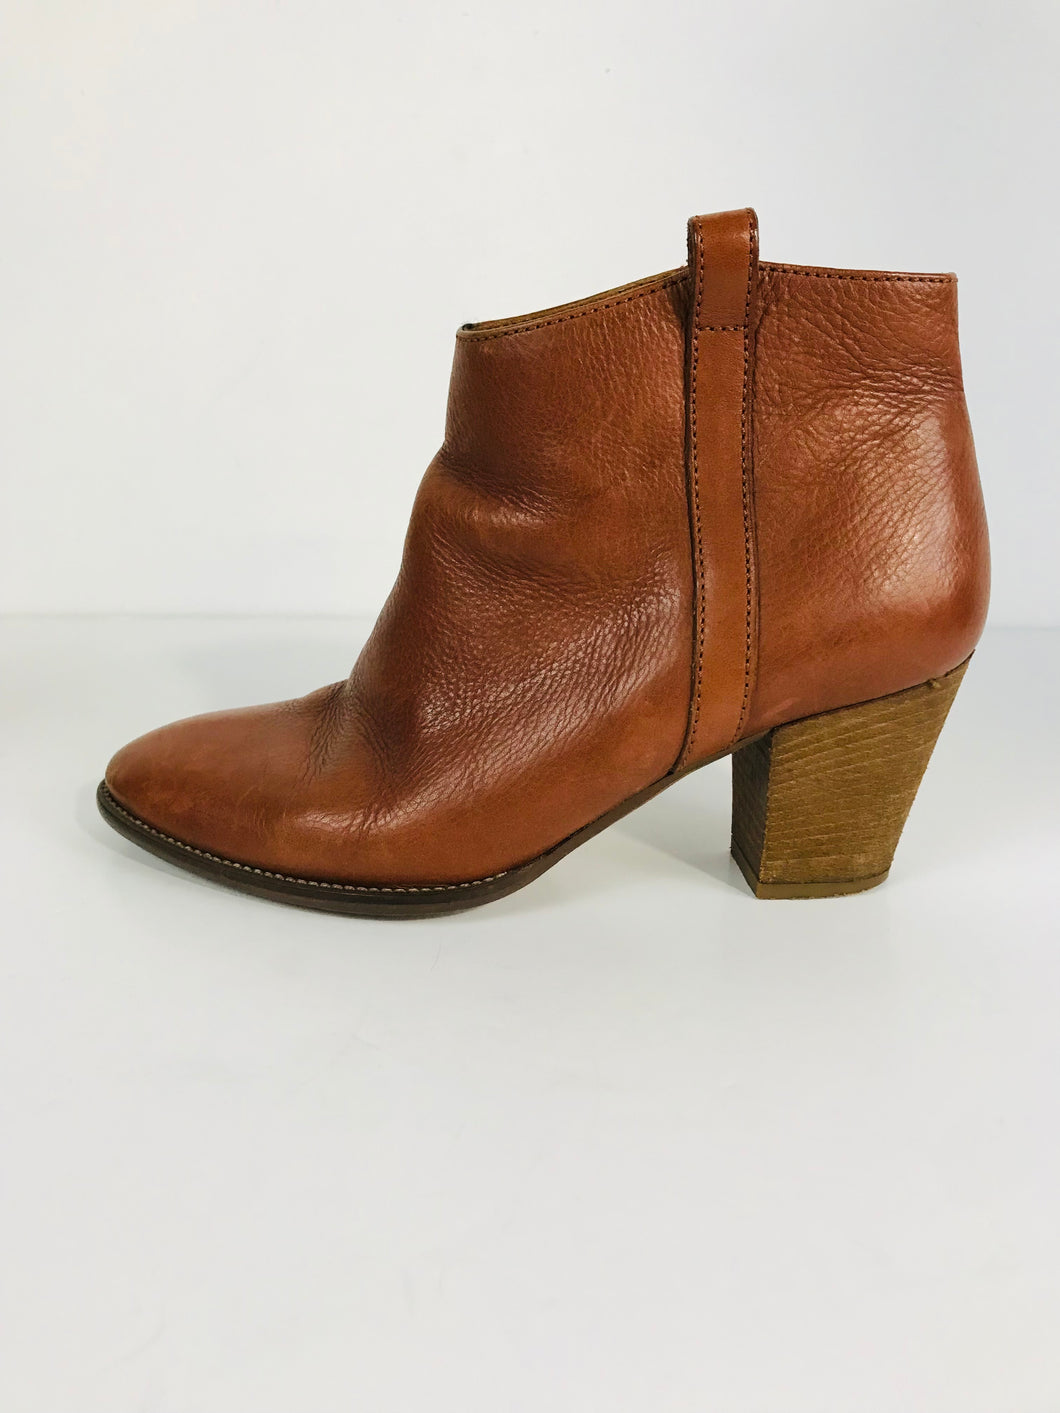 Madewell Women's Leather Heeled Ankle Boots | US8 UK6 | Brown